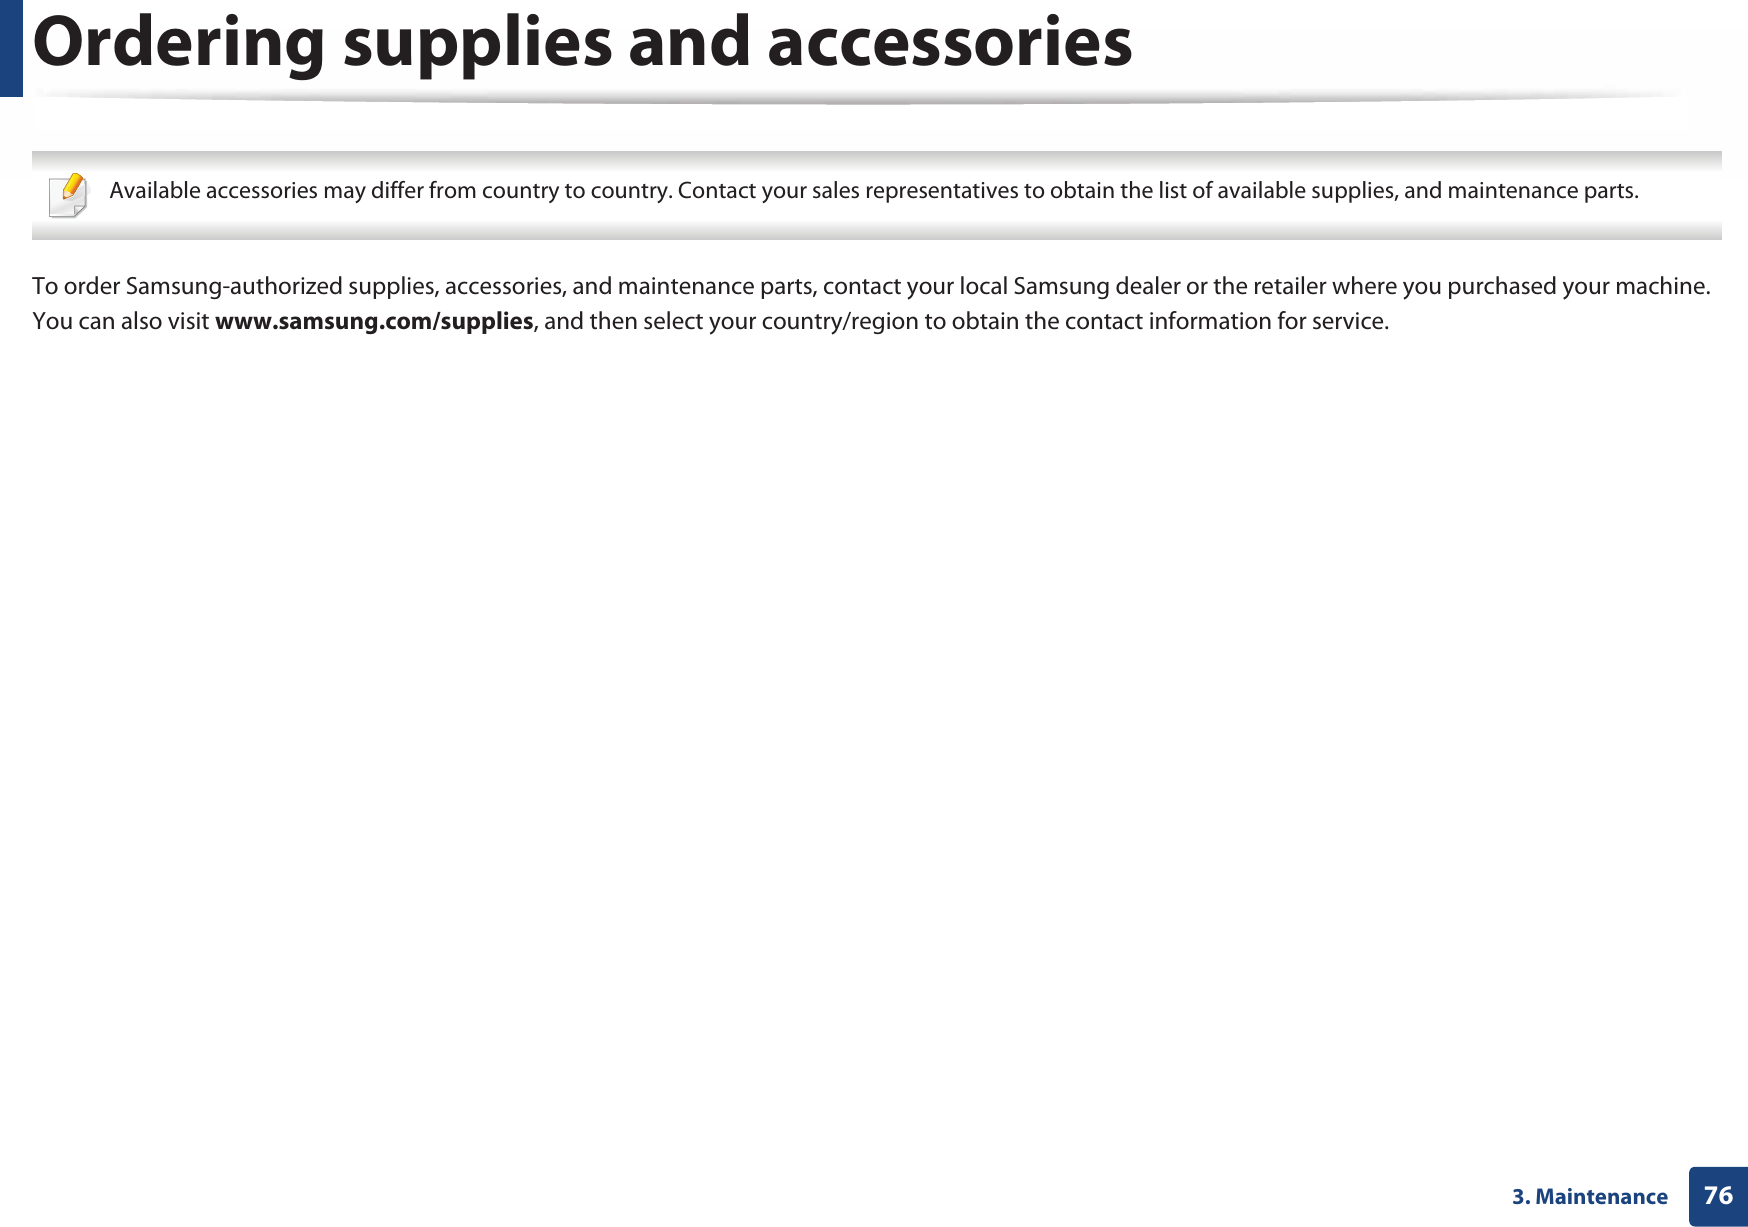 763. MaintenanceOrdering supplies and accessories Available accessories may differ from country to country. Contact your sales representatives to obtain the list of available supplies, and maintenance parts. To order Samsung-authorized supplies, accessories, and maintenance parts, contact your local Samsung dealer or the retailer where you purchased your machine. You can also visit www.samsung.com/supplies, and then select your country/region to obtain the contact information for service.